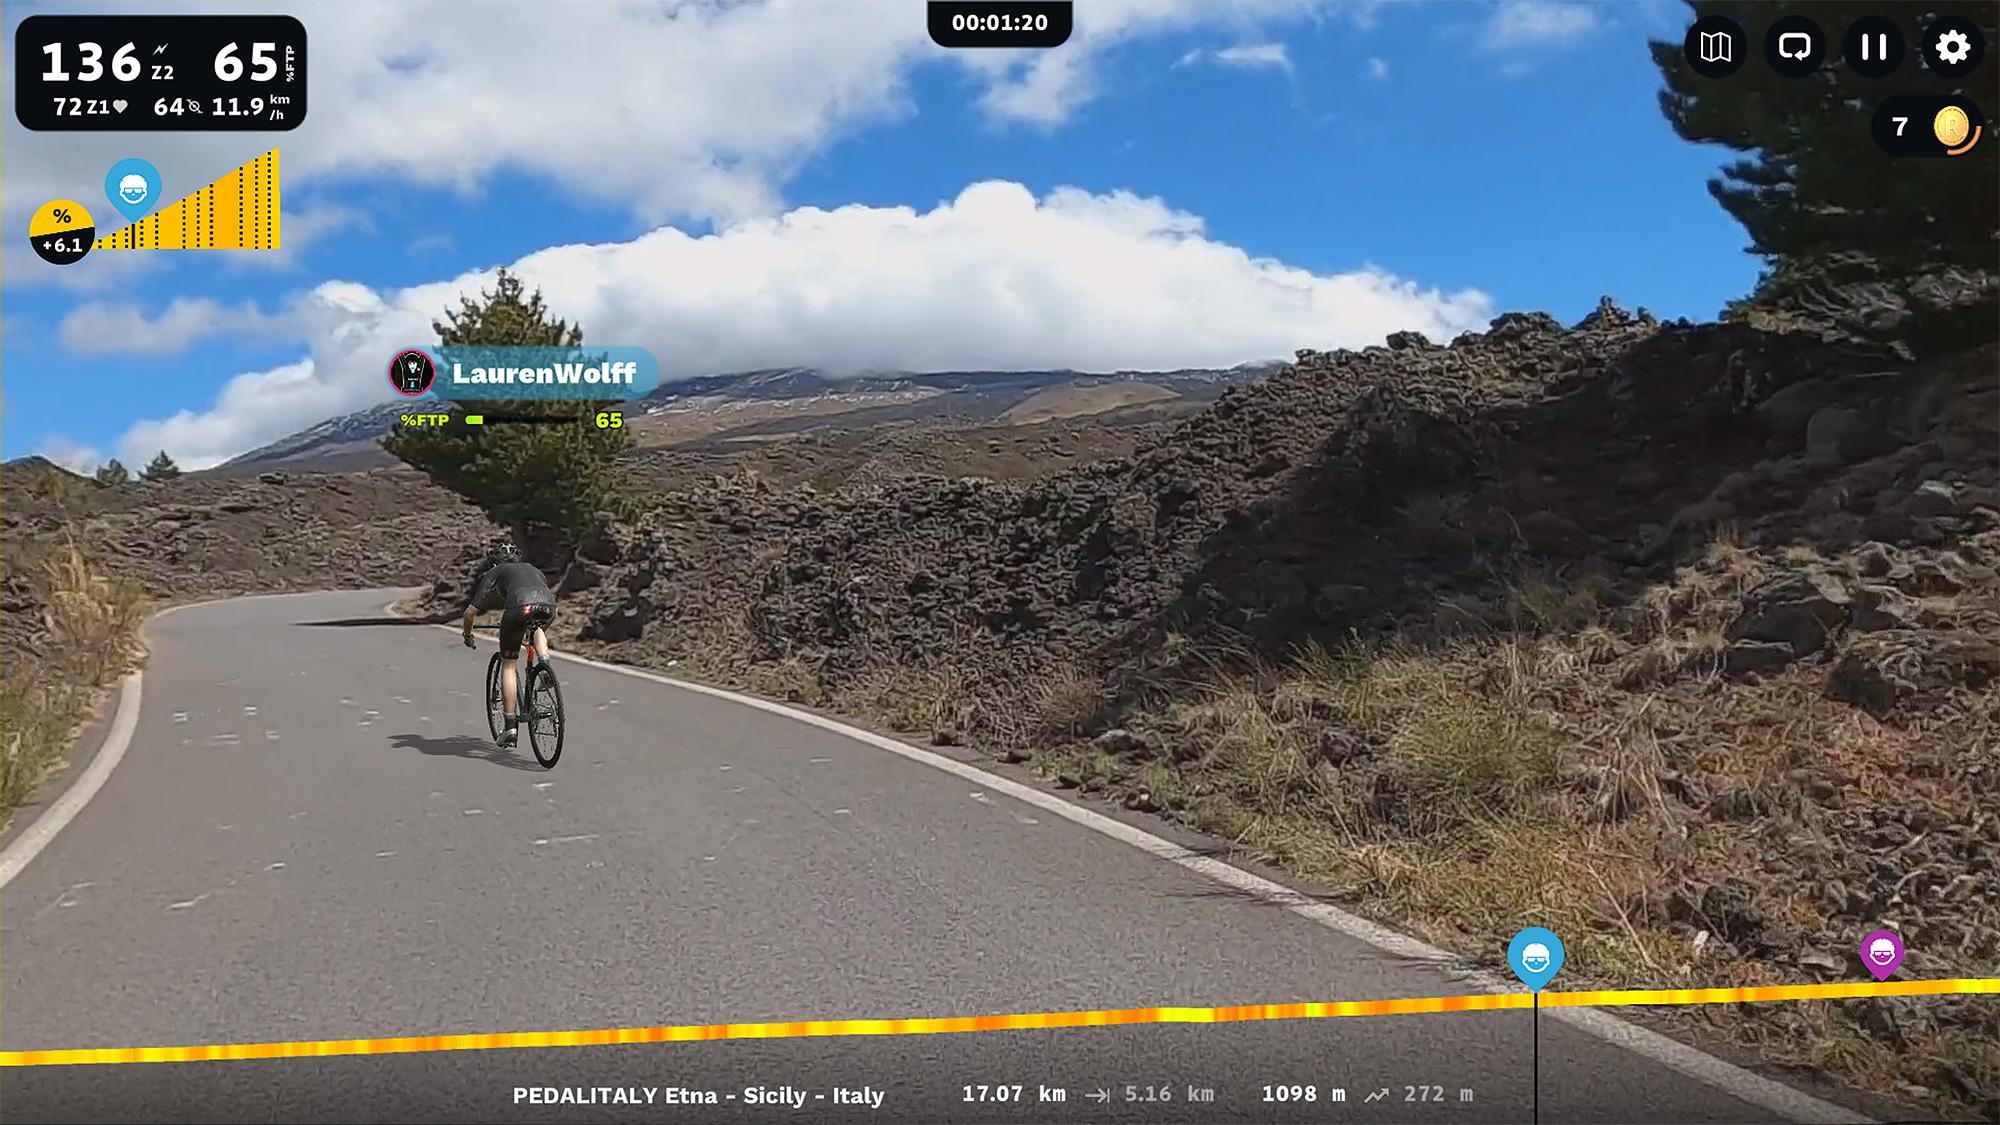 Cycle up Mt Etna and experience riding this legendary lava covered volcano on ROUVY